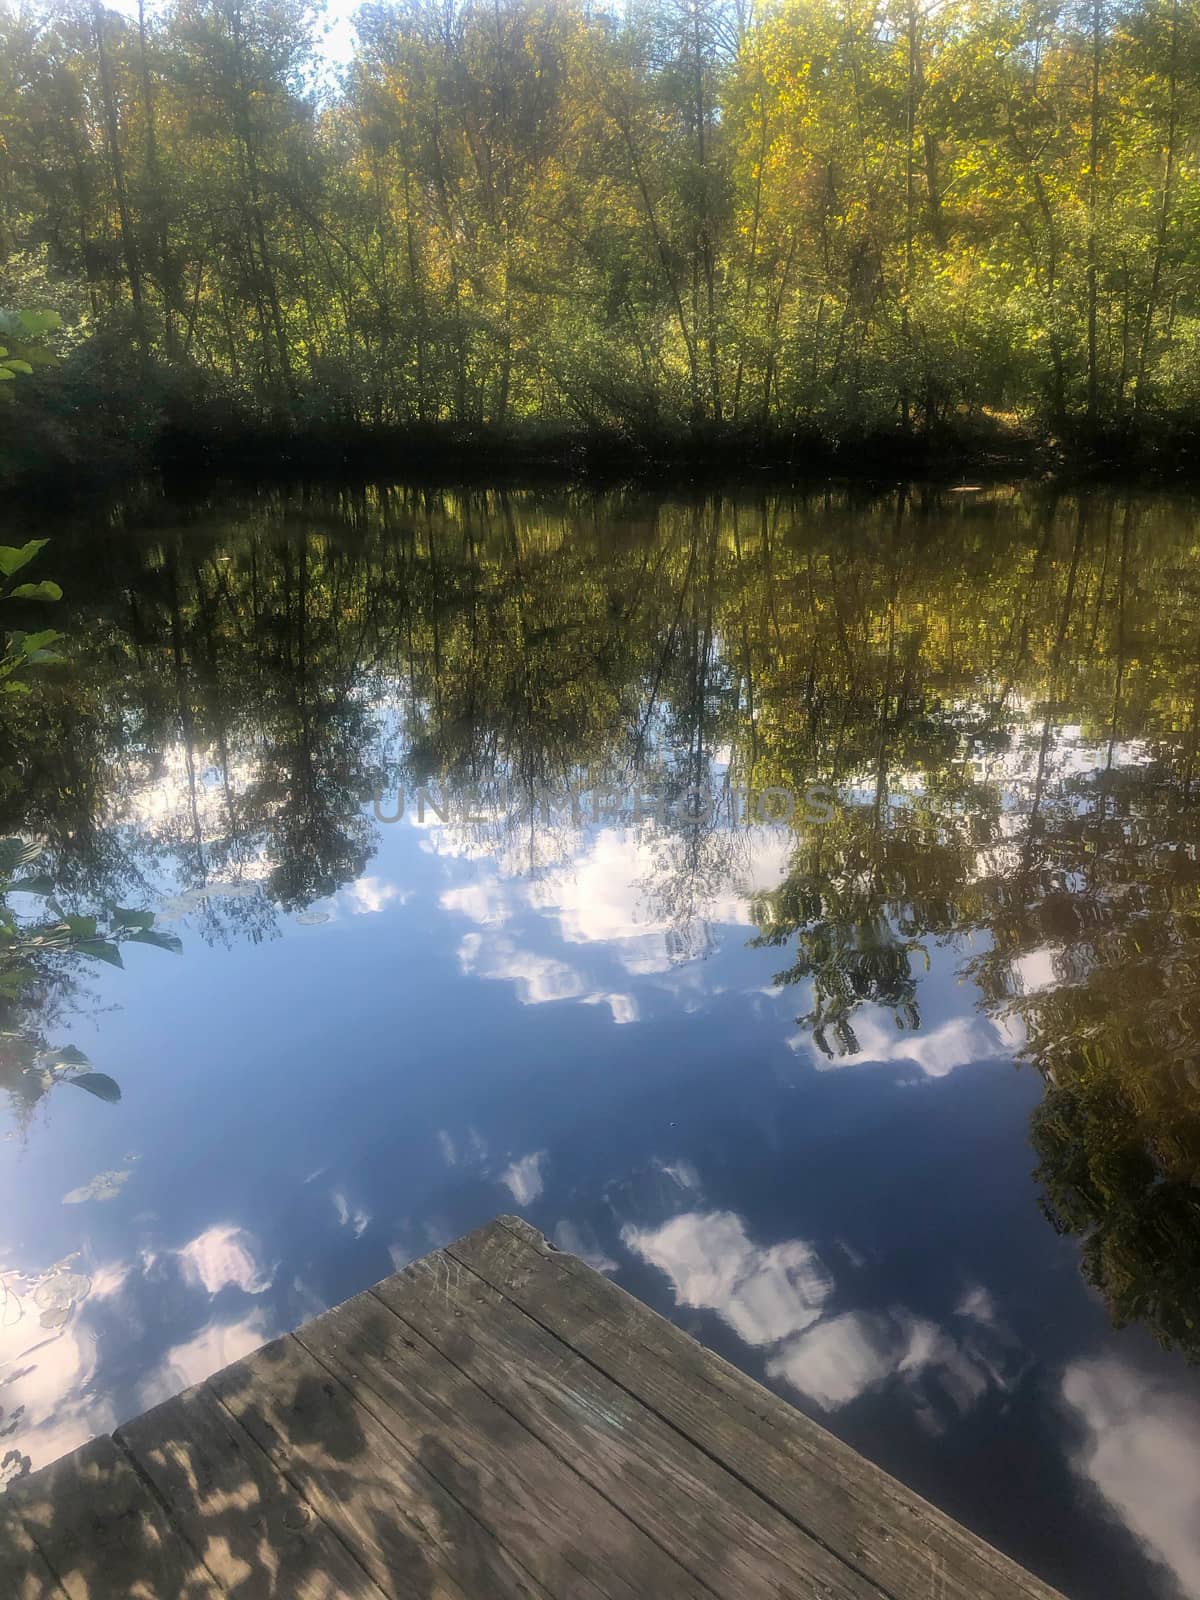 abstract forest and sky reflected in lake. Dock in foreground. by marysalen